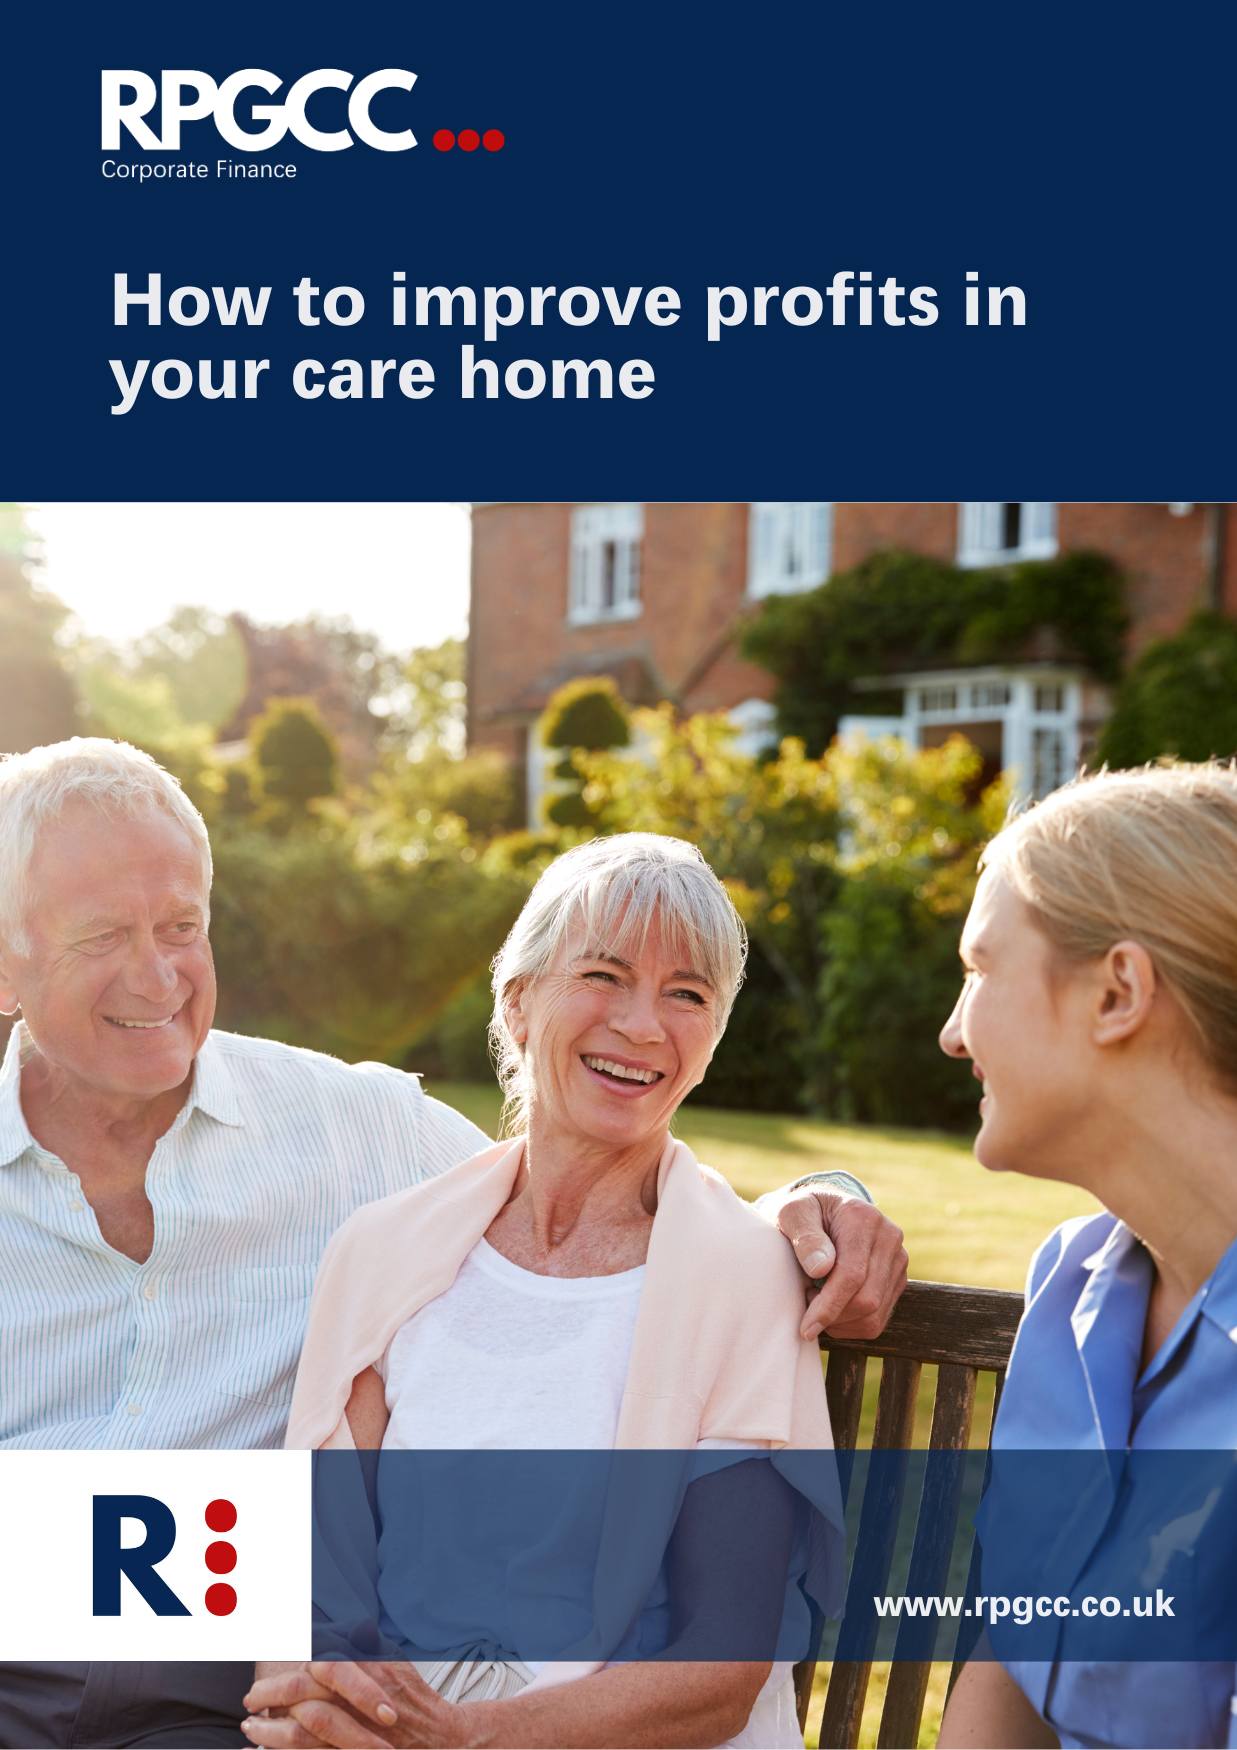 How to improve profits in your care home